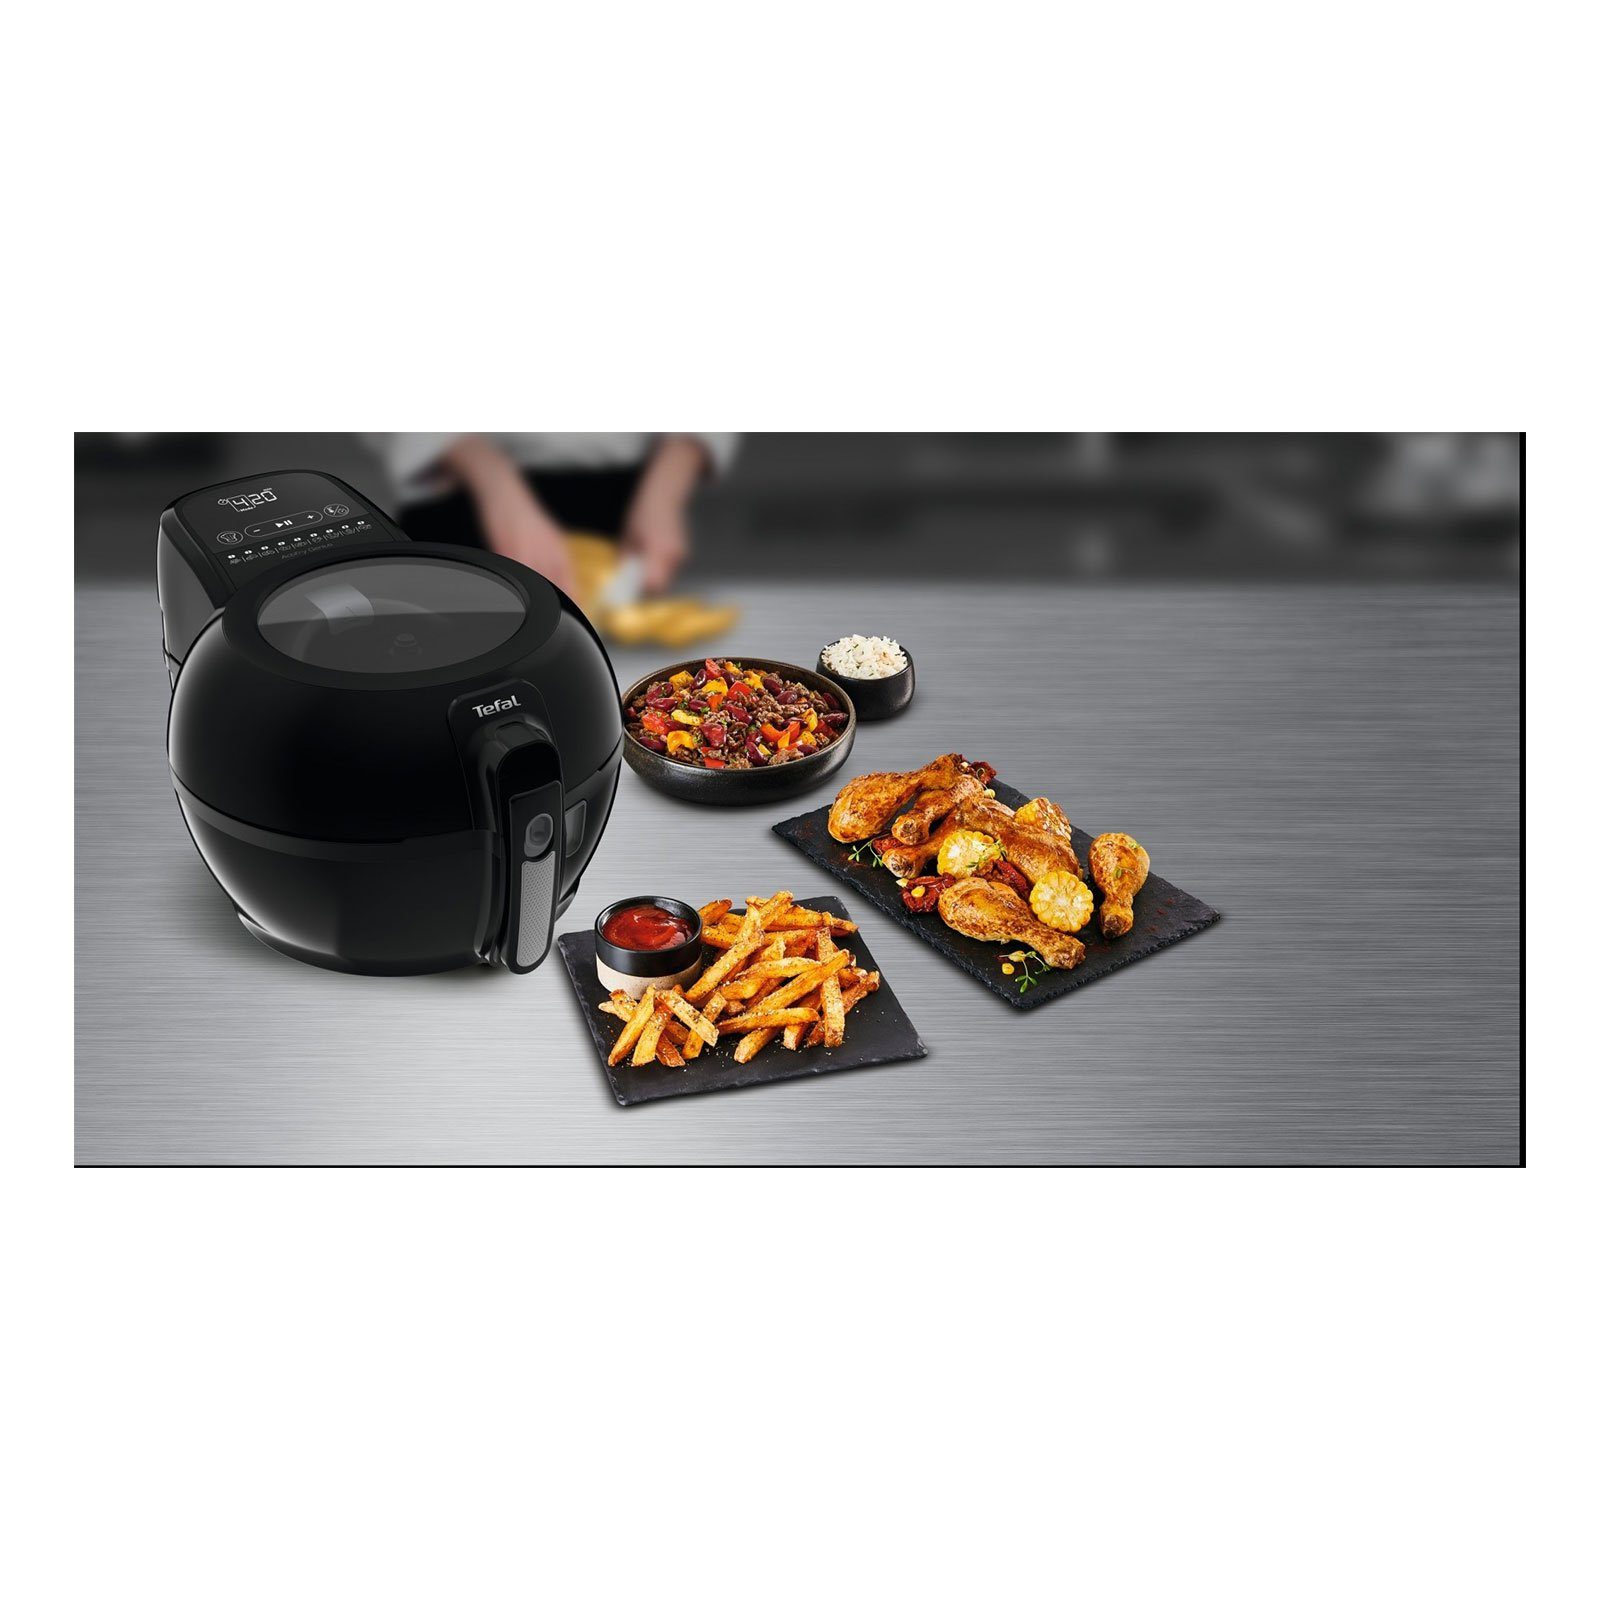 Tefal Fritteuse 773815 Genius 1550 W FZ Heißluft-Fritteuse, ActiFry Smart